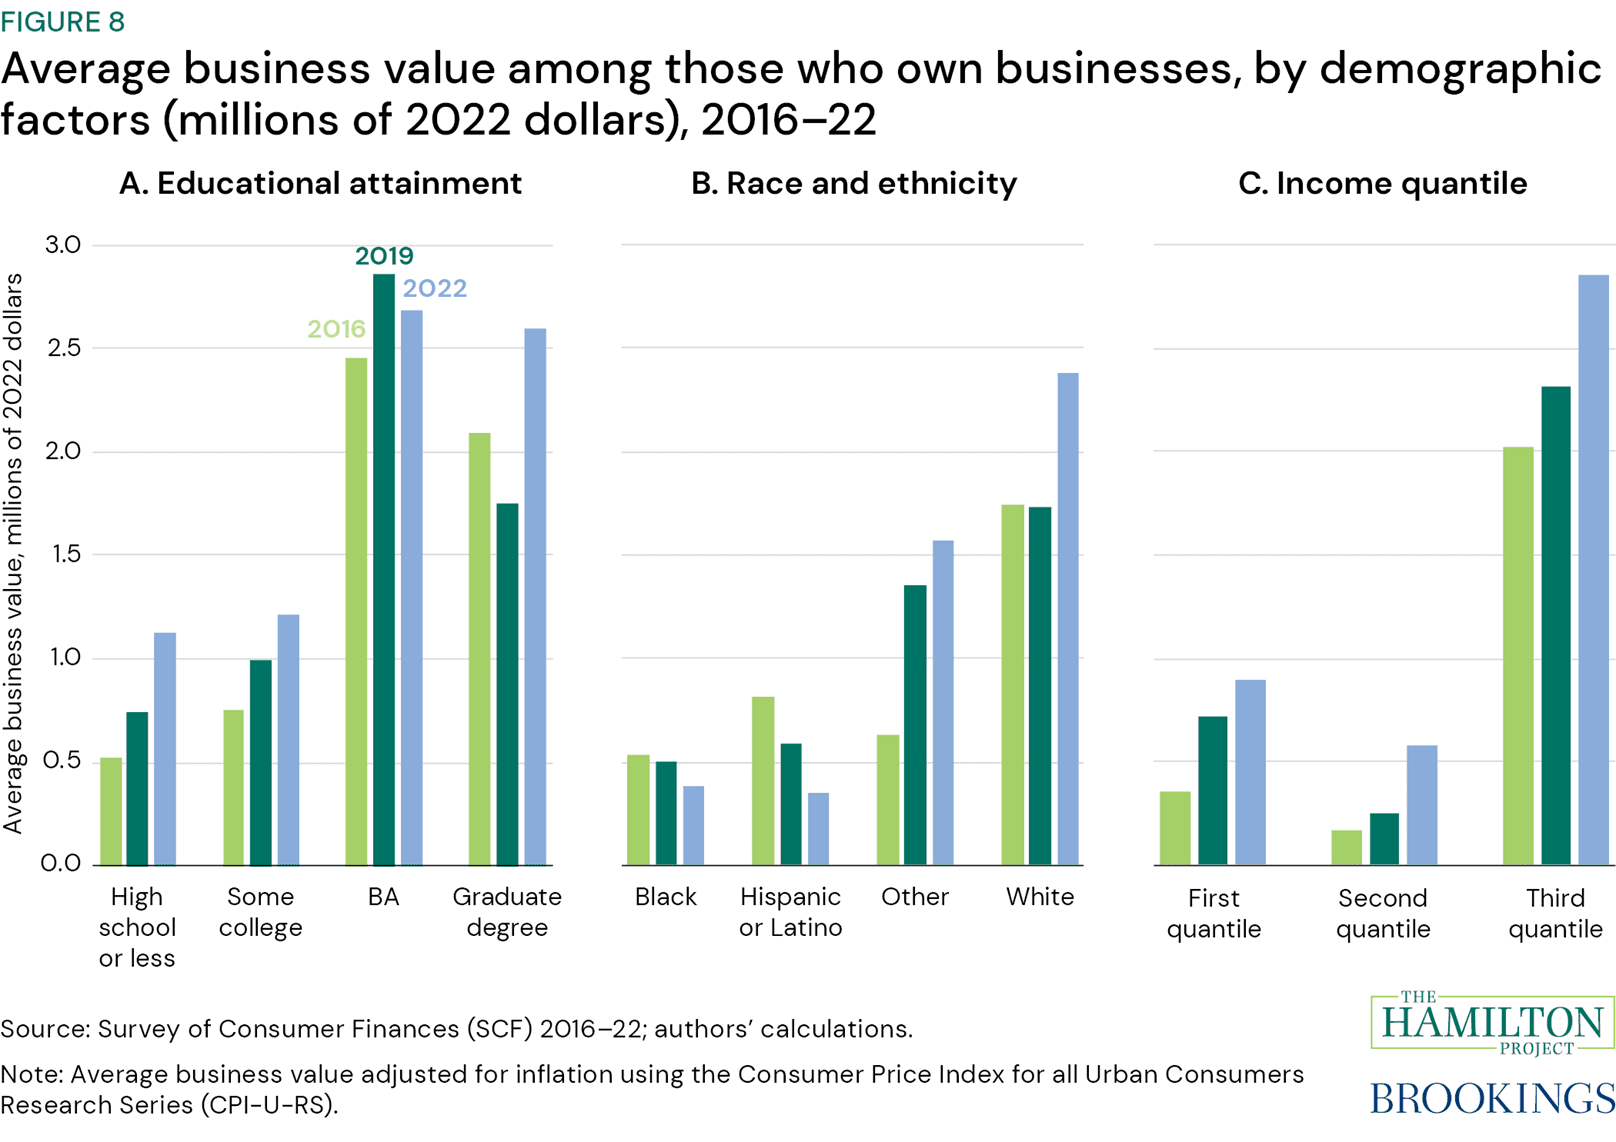 Figure 8: Average business value among those who own businesses, by demographic factors (millions of 2022 dollars), 2016-22. Figure 8 shows the average value of employer businesses among those who owned such businesses by educational attainment, race and ethnicity, and income quantile.